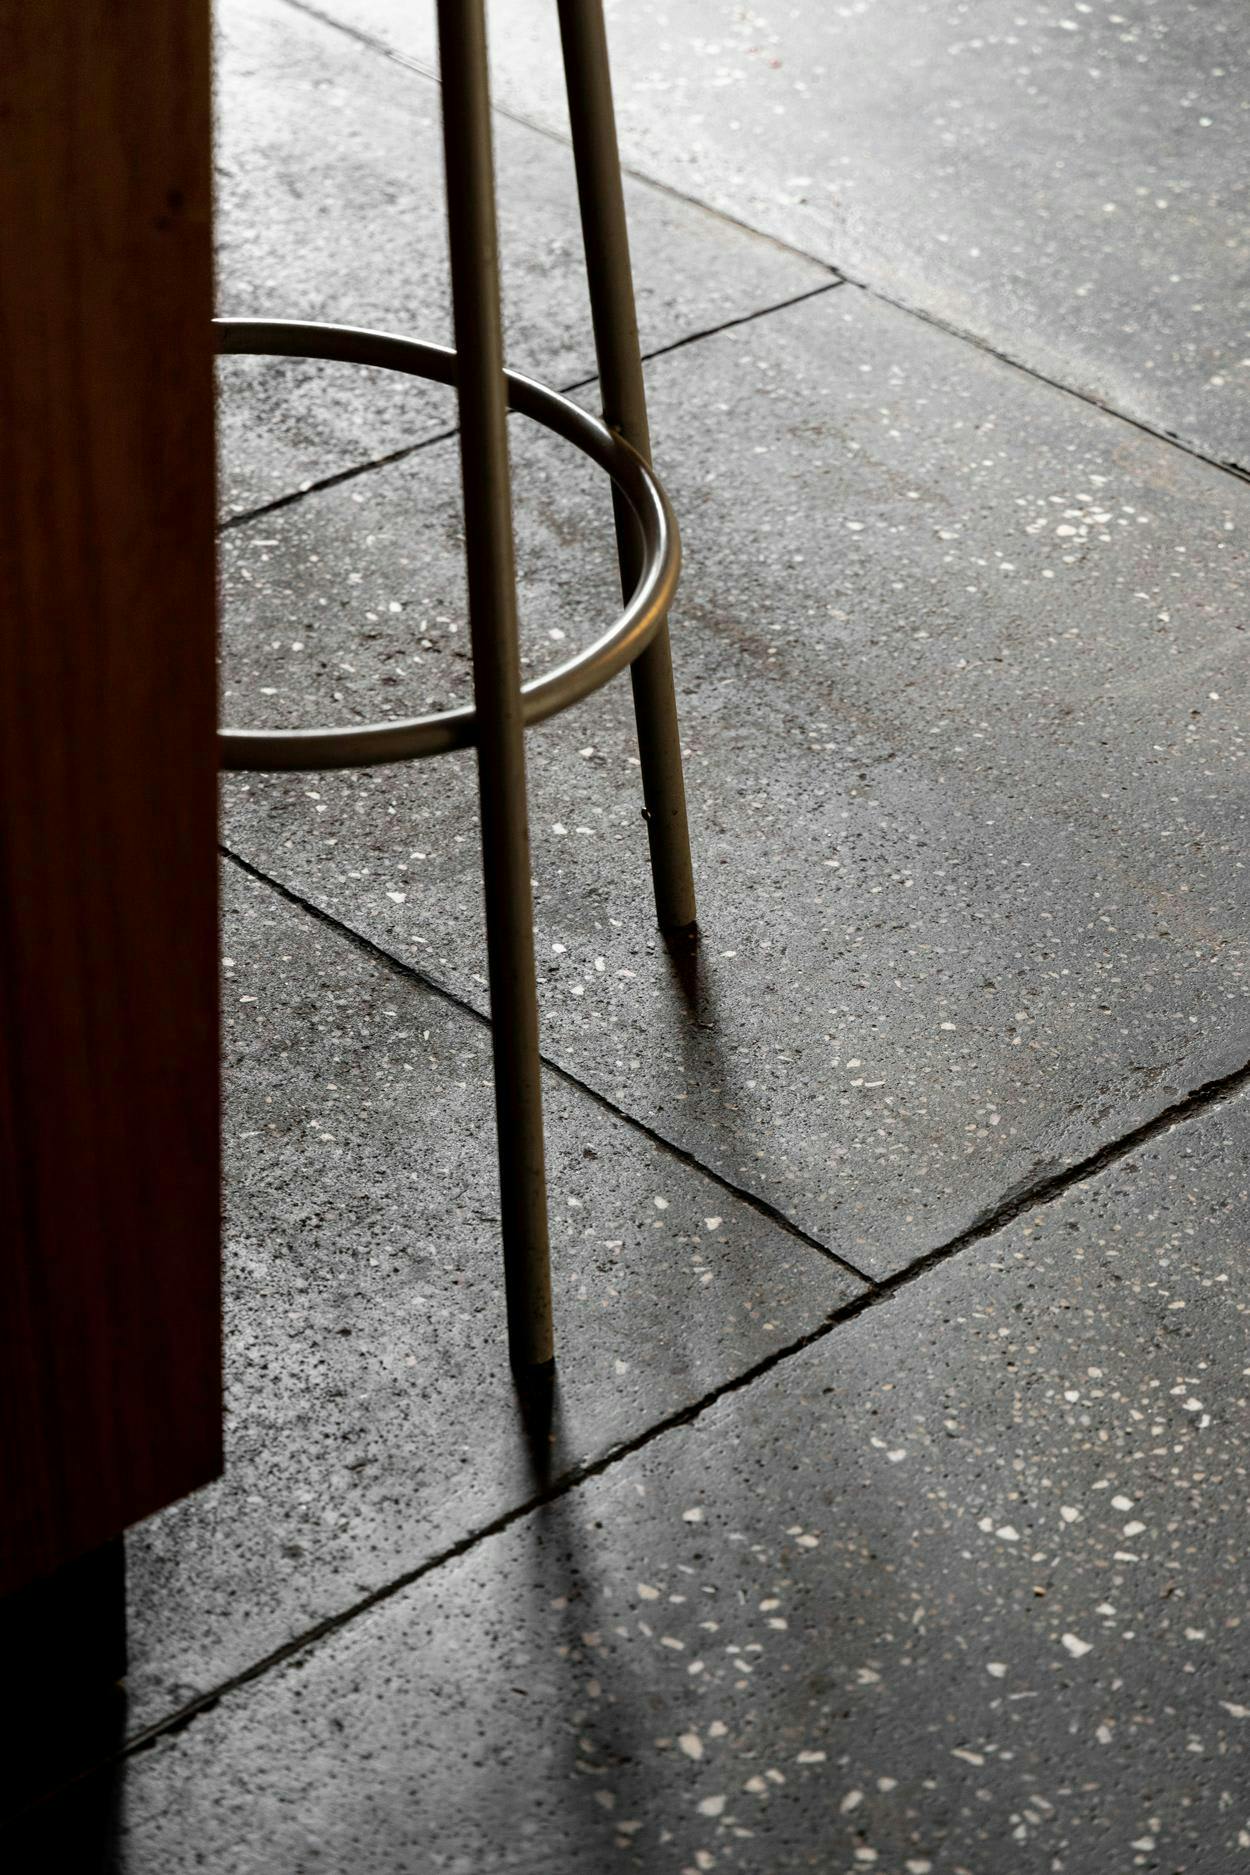 A chair is placed on a tiled floor, with a metal pole sticking out of it.